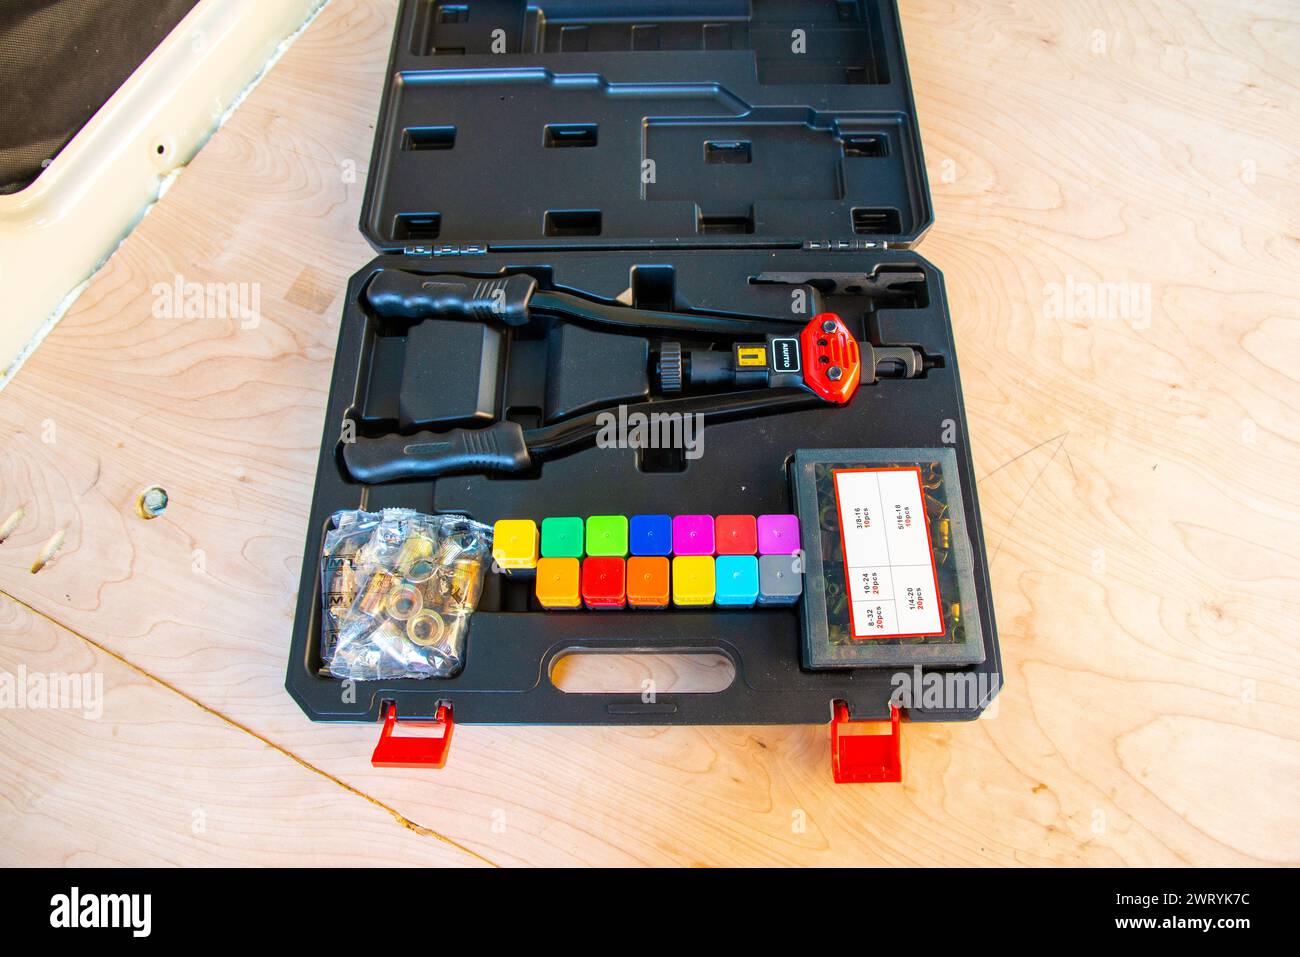 Aiuitio rivet nut tool set used in Mercedes Benz sprinter cargo van conversion to mobil home. Cary, North Carolina, Stock Photo